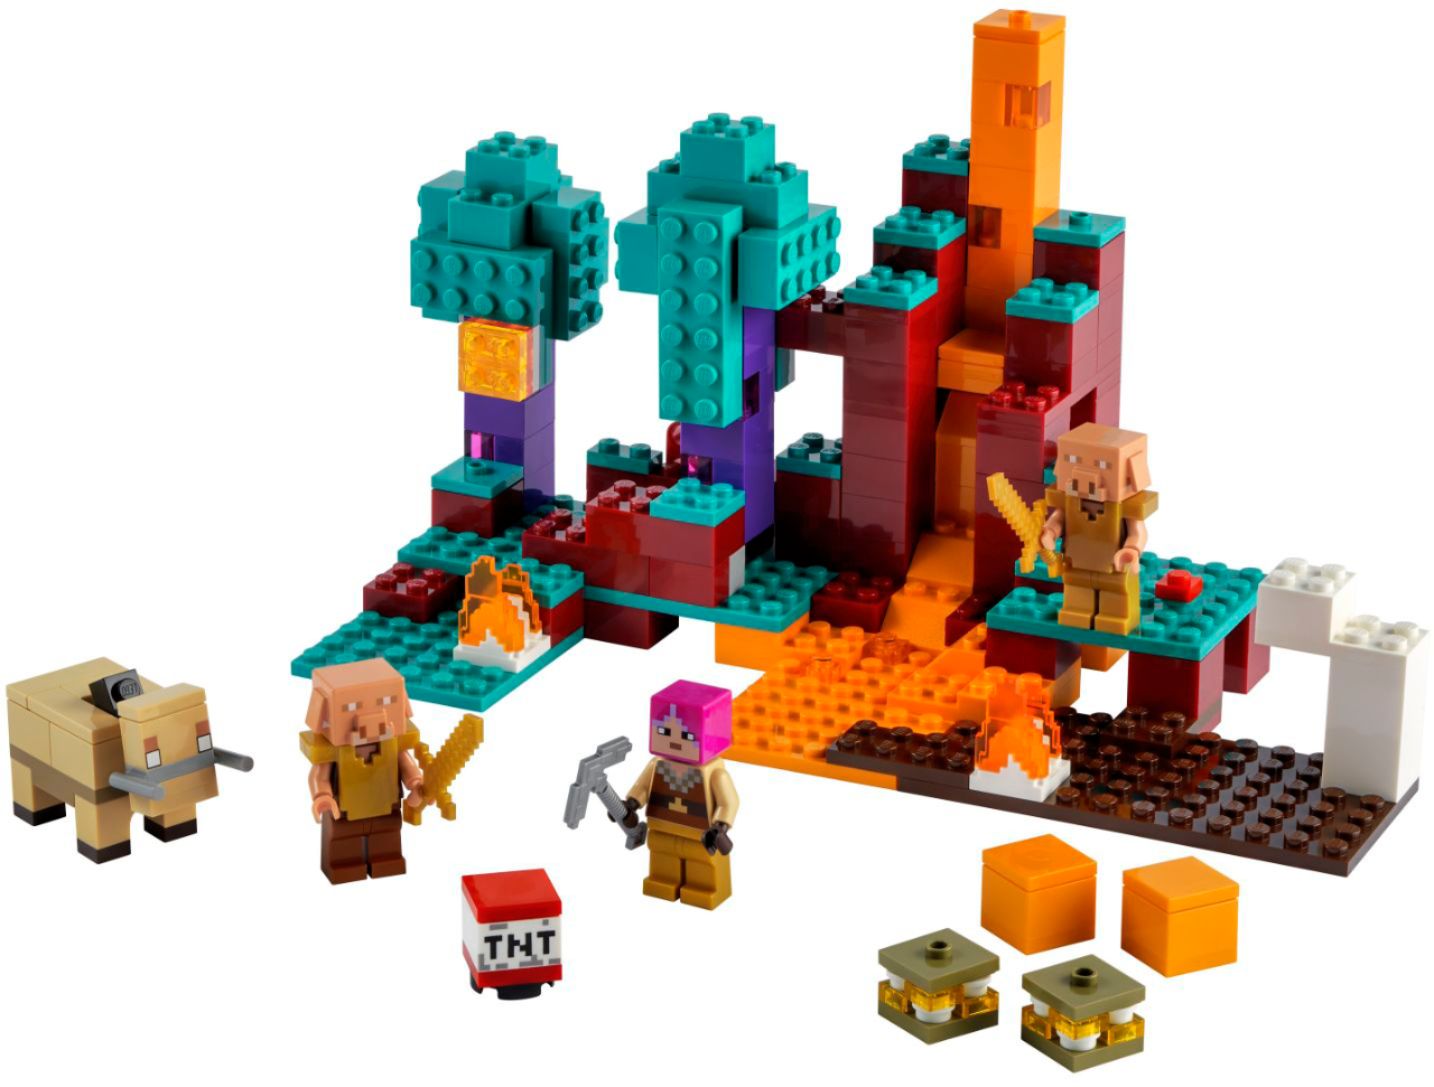 These new Lego Minecraft sets look decidedly more 'Lego' than ever